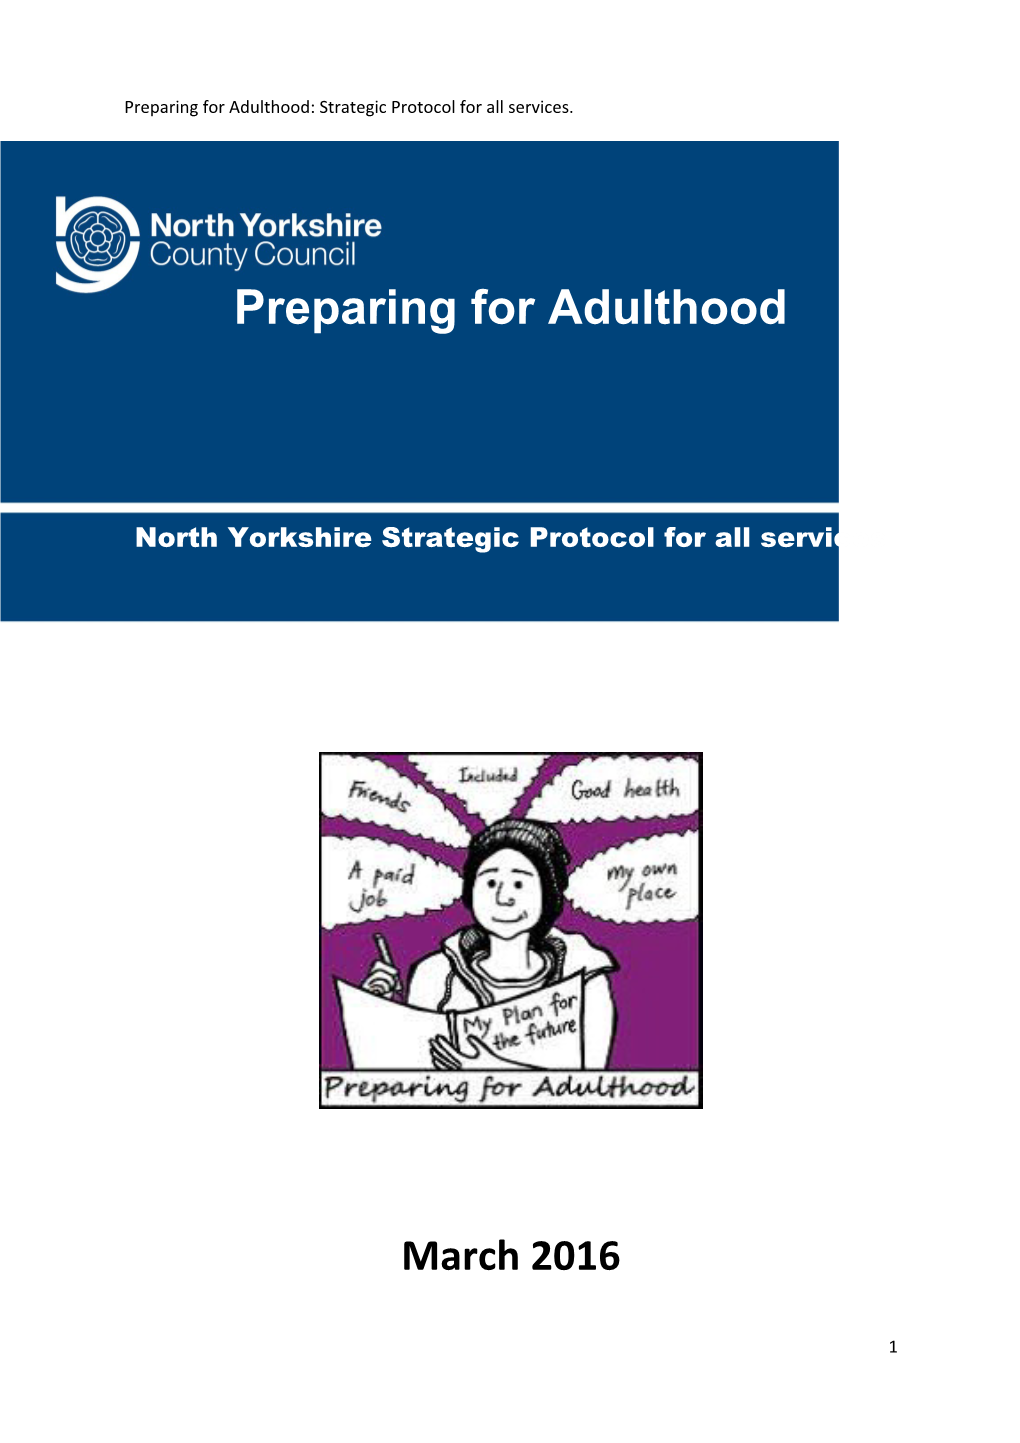 North Yorkshire Strategic Protocol for All Services